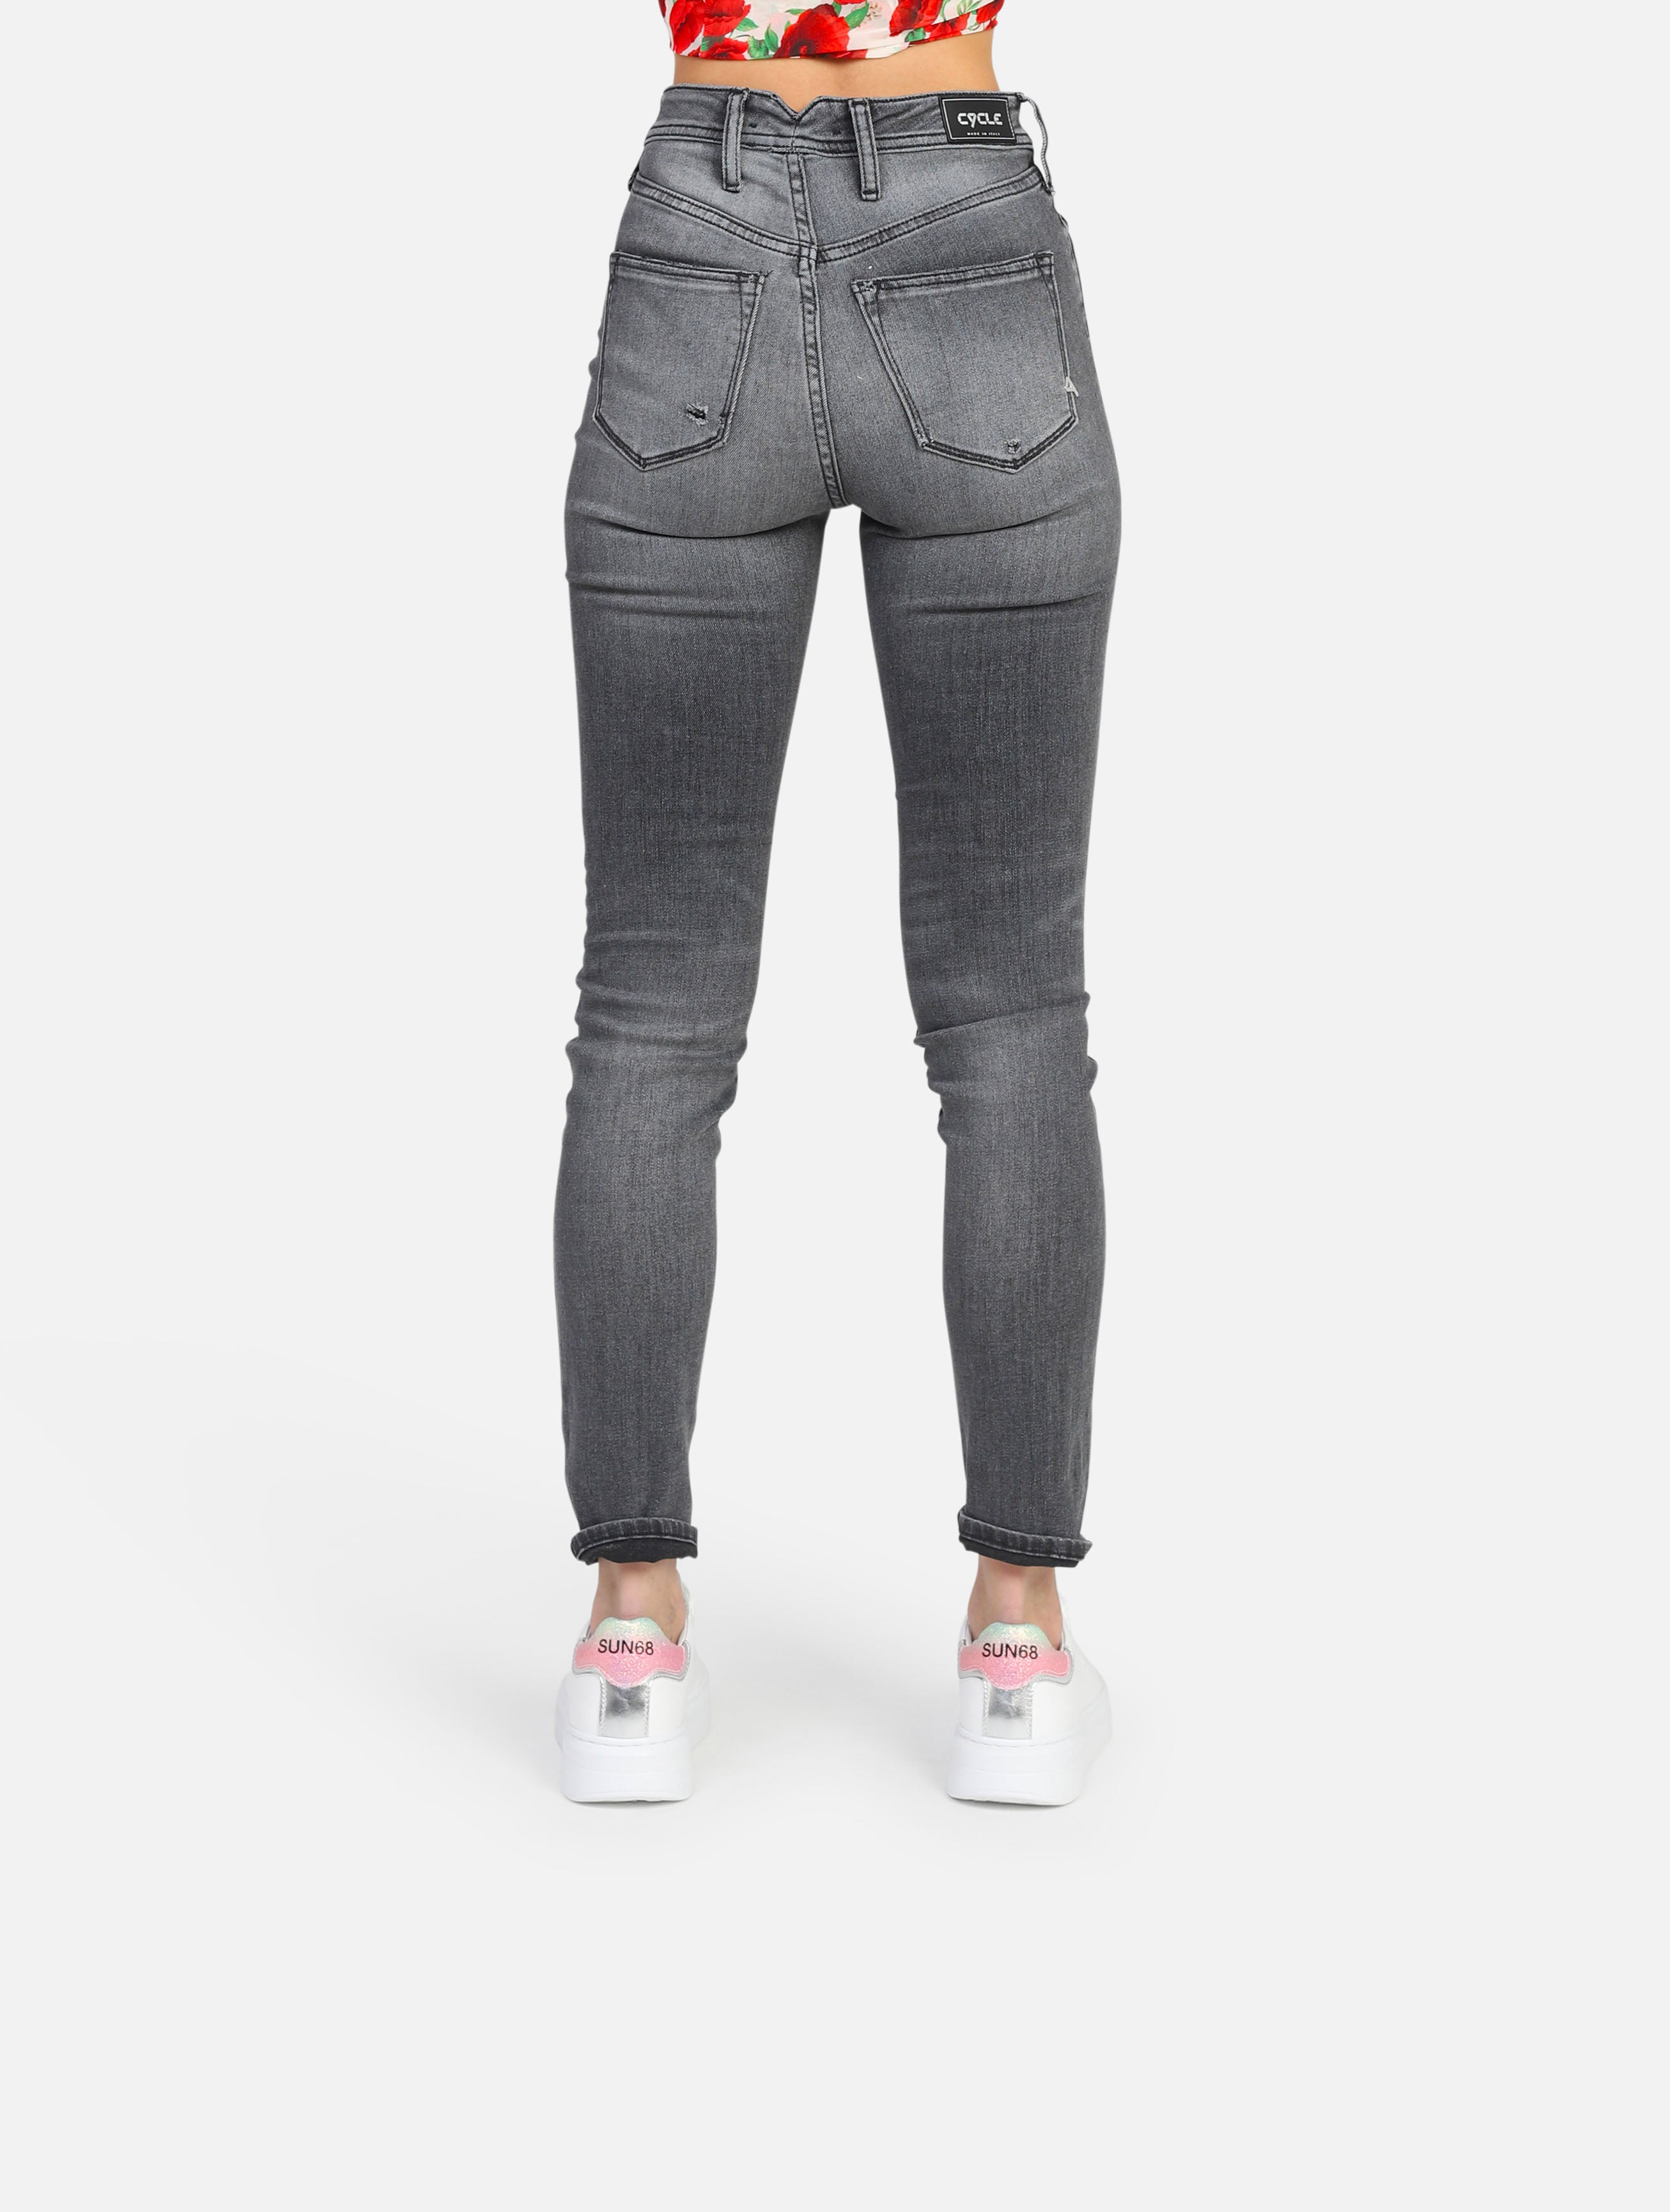 Jeans cycle  -  grigio scuro woman  - 3